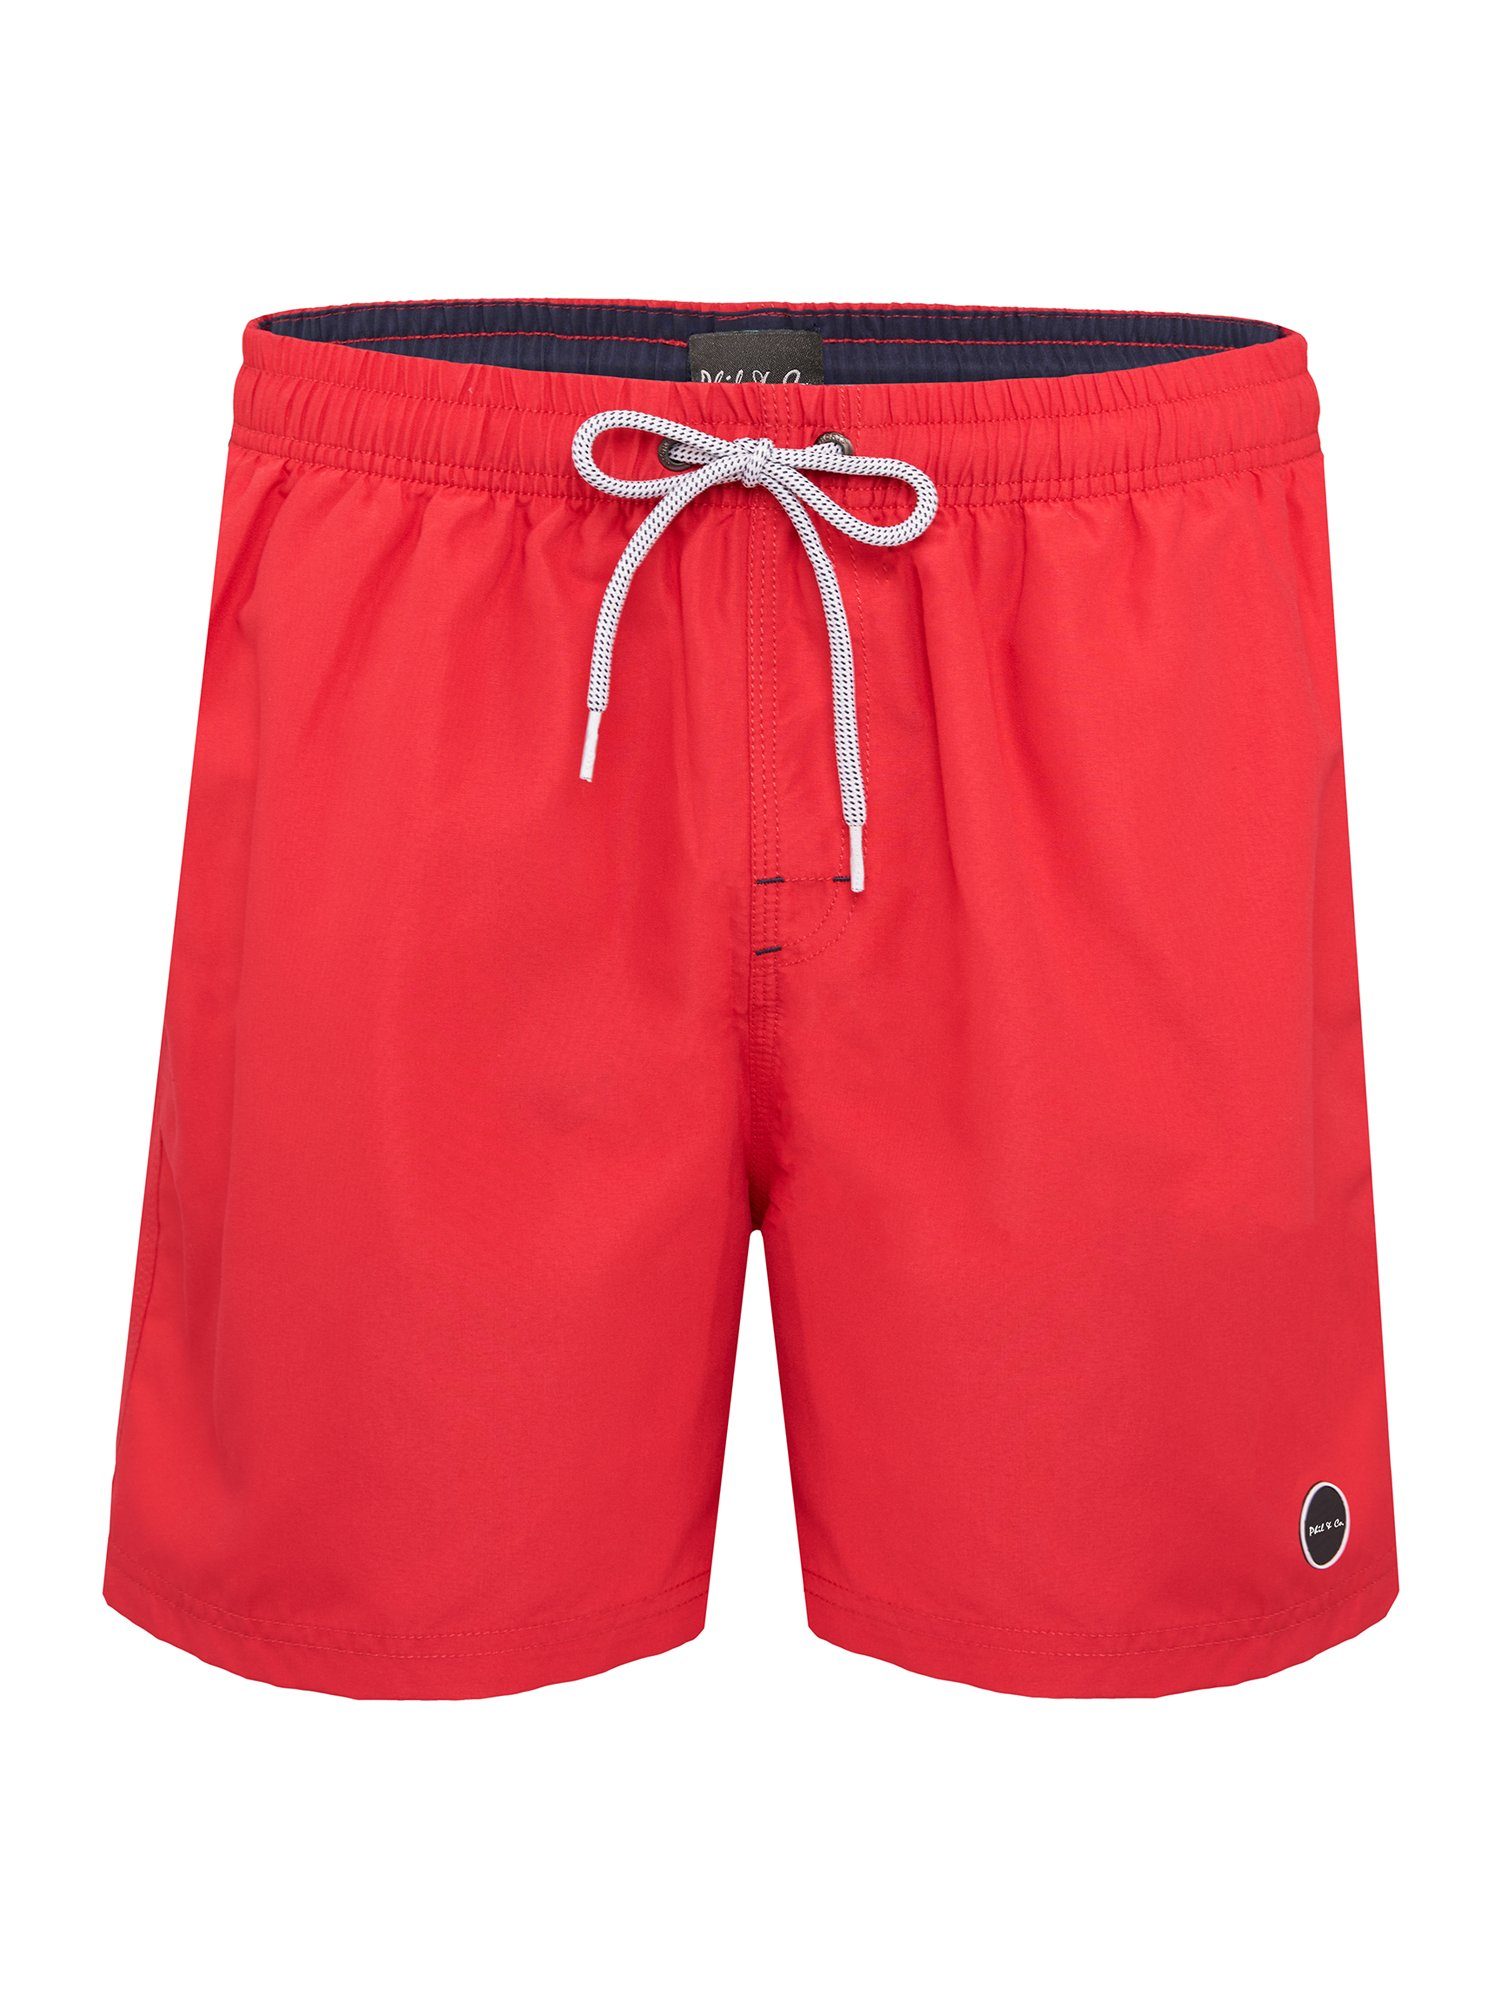 Phil & Co. Badeshorts Classic (1-St) red solid